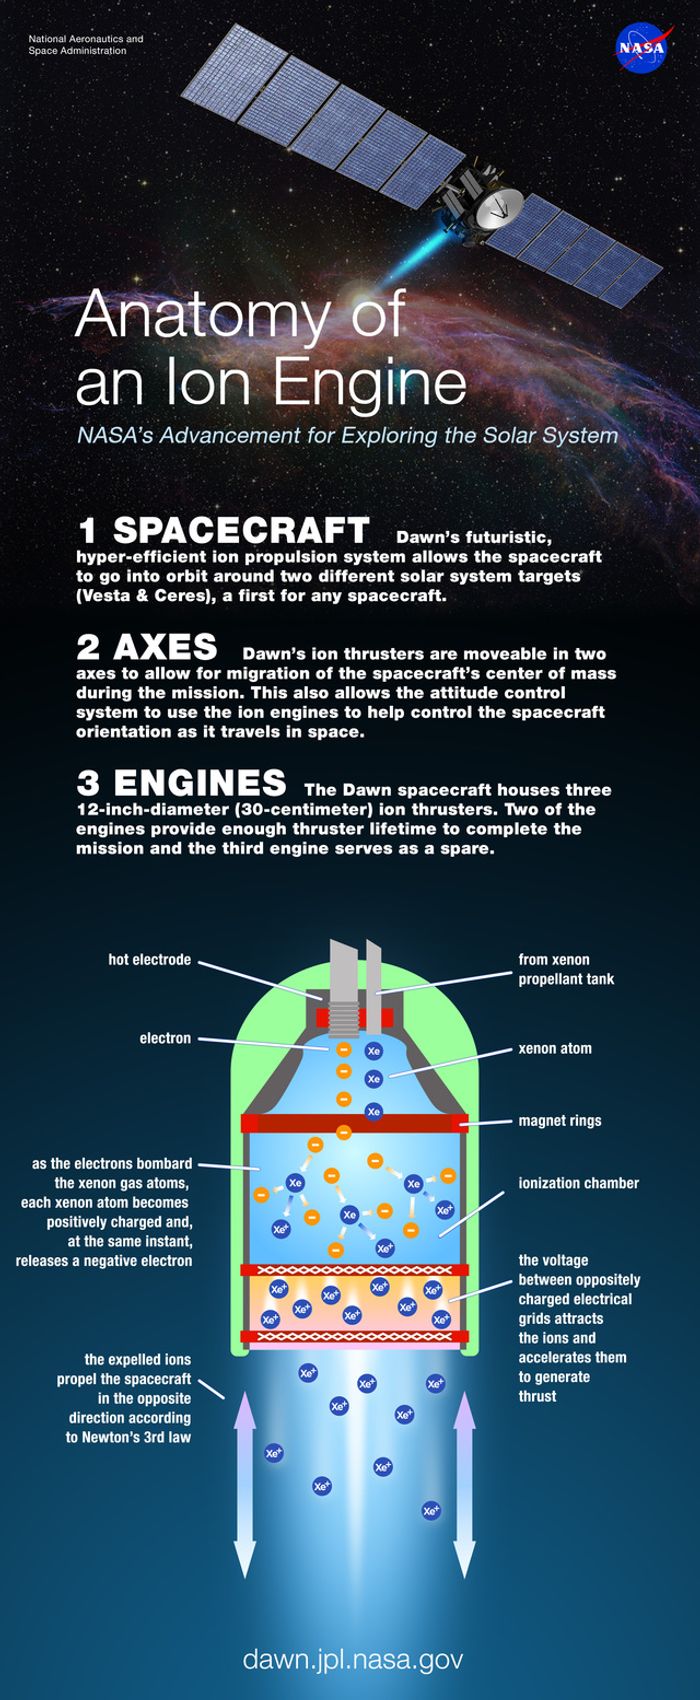 How does and ion engine, like the one on NASA's Dawn probe work?